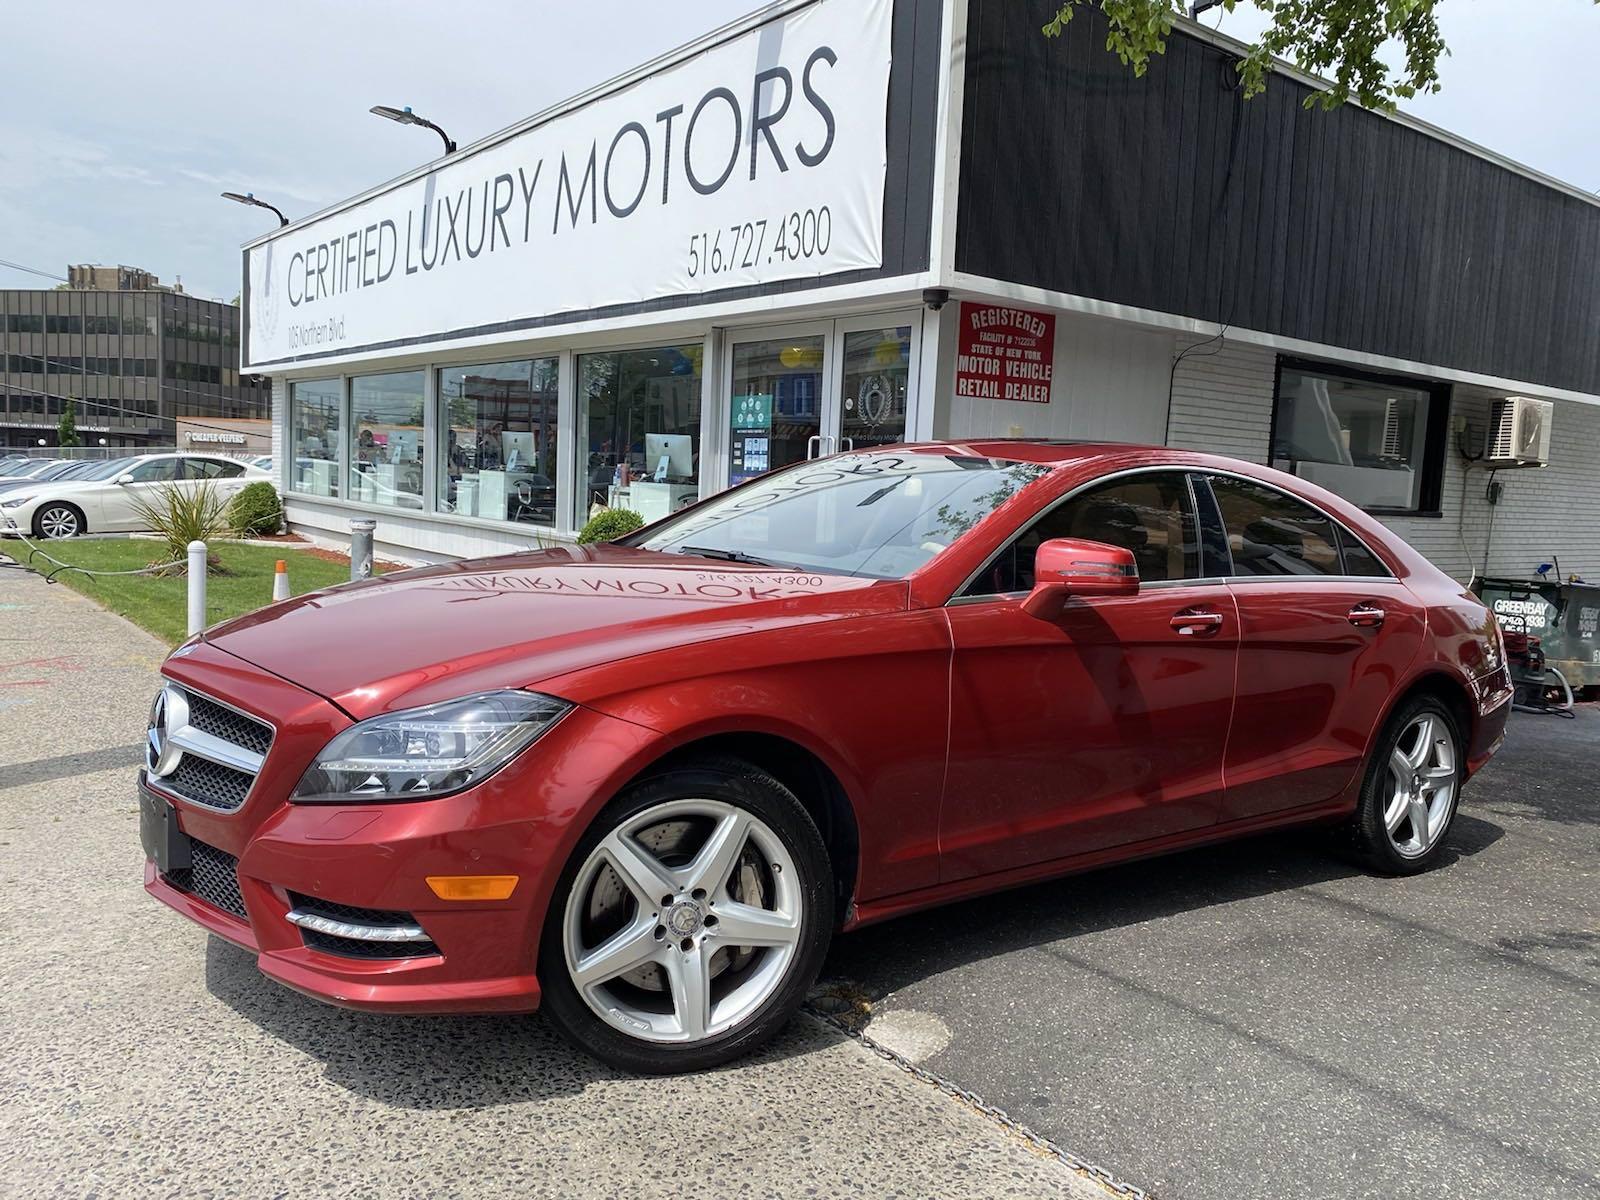 2014 Mercedes-Benz CLS-Class CLS 550 Stock # C0778 for sale near Great  Neck, NY | NY Mercedes-Benz Dealer